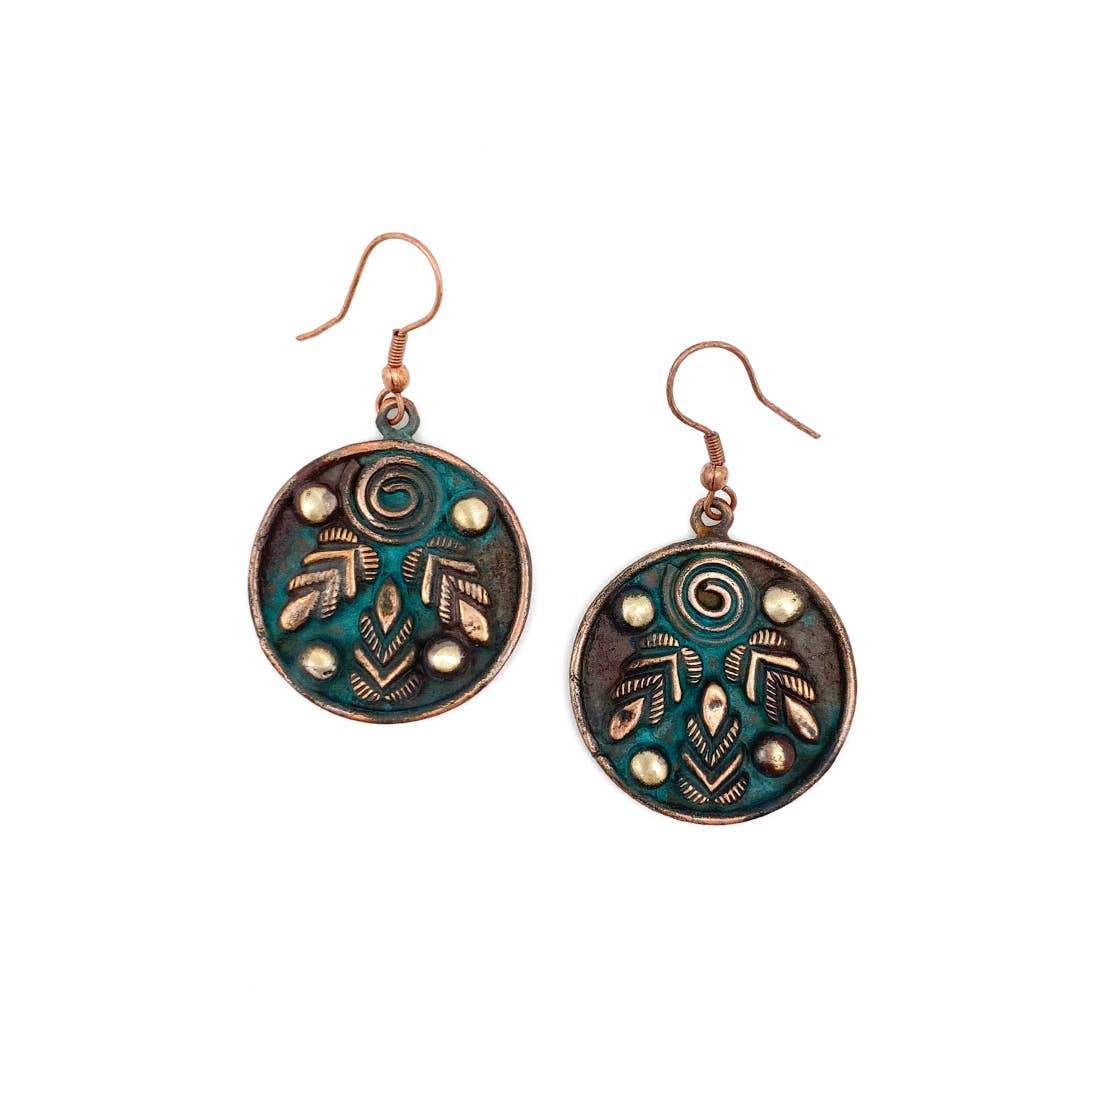 Copper Patina Earrings - Three Leaves and Spiral Teal Circle